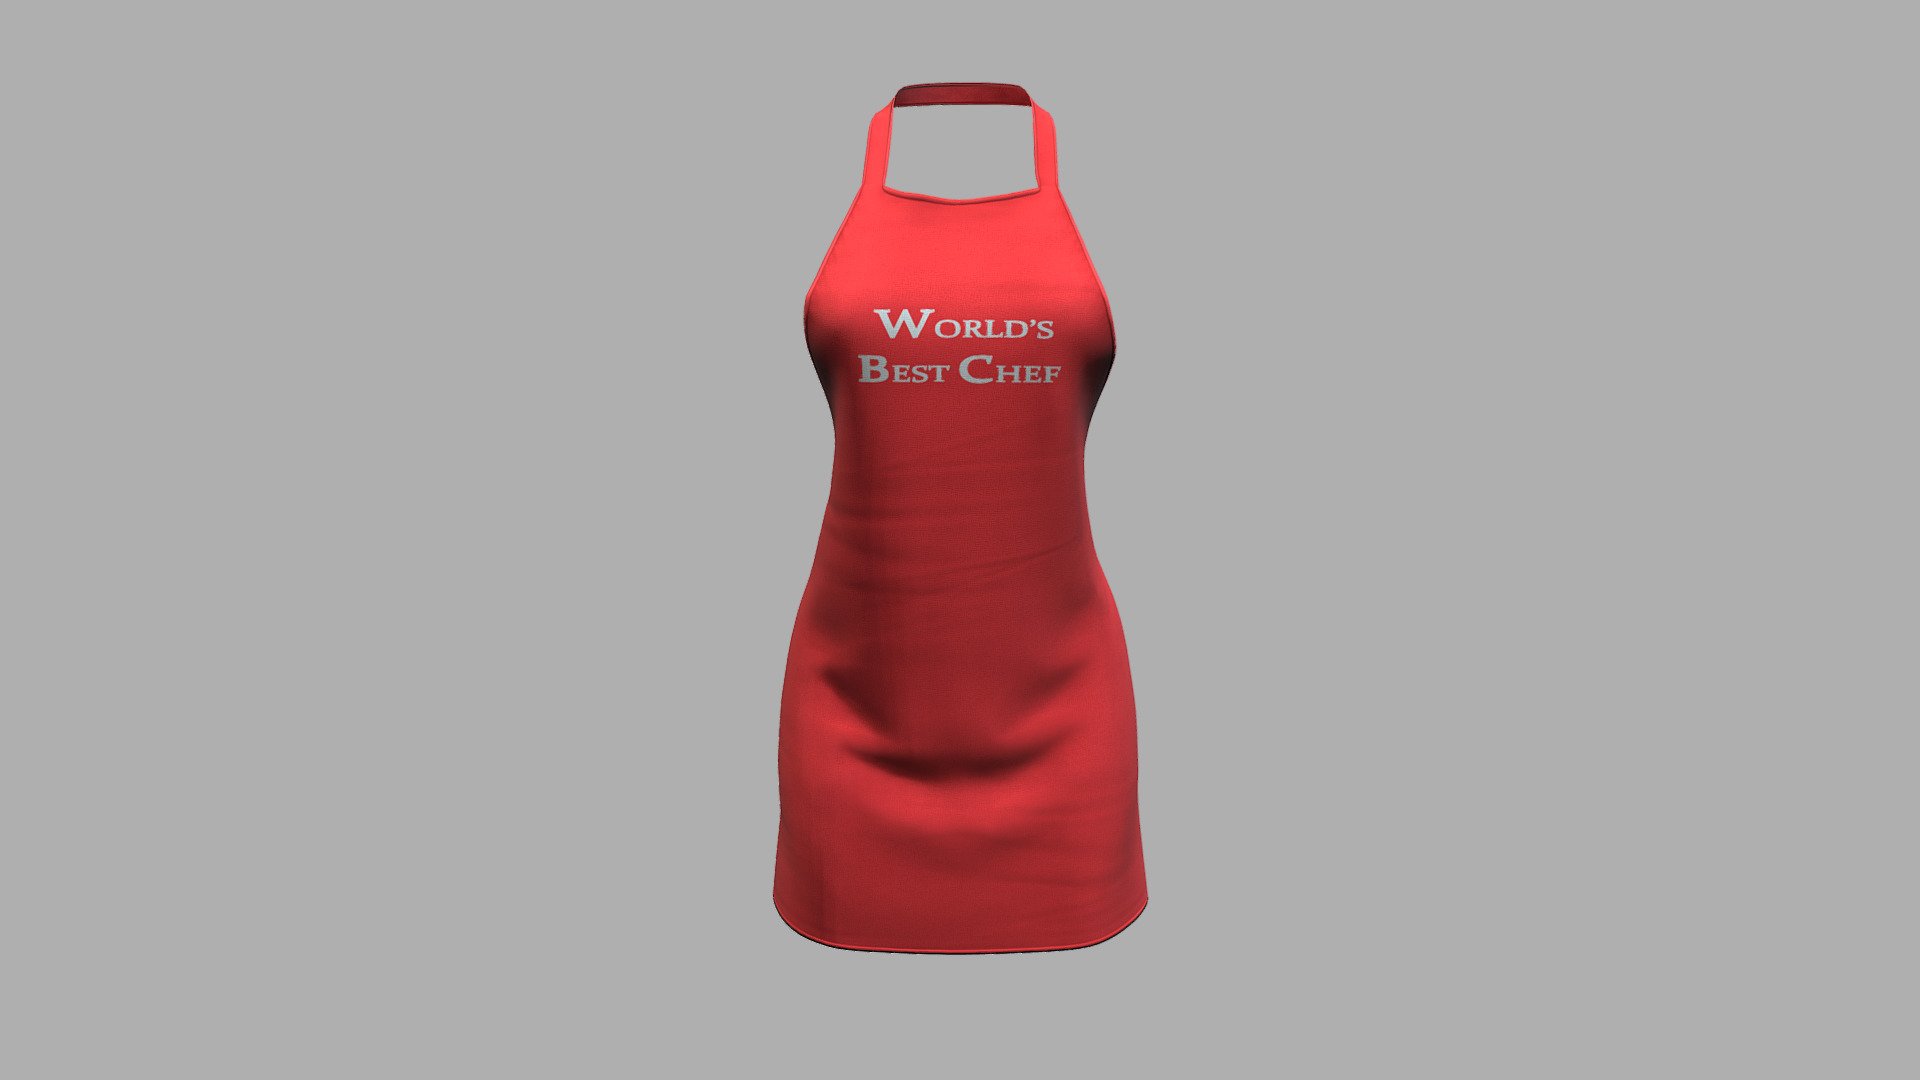 Female Cook Apron

Can be fitted to any character

Clean topology

No overlapping smart optimized unwrapped UVs

High-quality realistic textures

FBX, OBJ, gITF, USDZ (request other formats)

PBR or Classic

Type     user:3dia &ldquo;search term